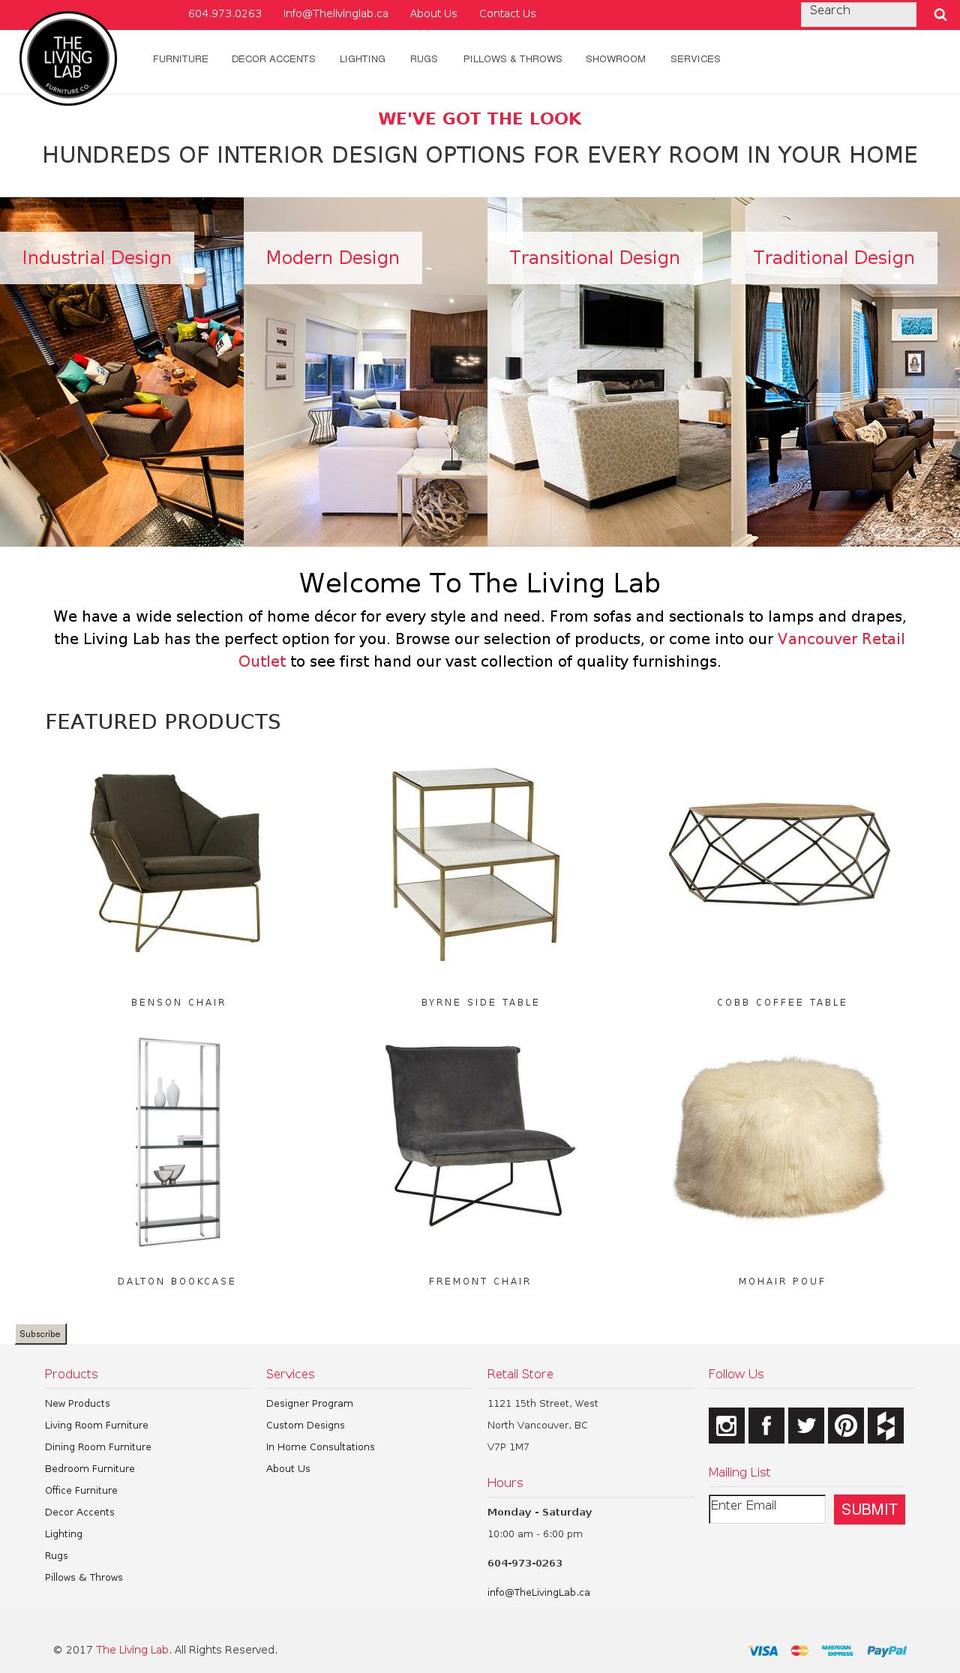 Fashion Shopify theme site example thelivinglab.ca